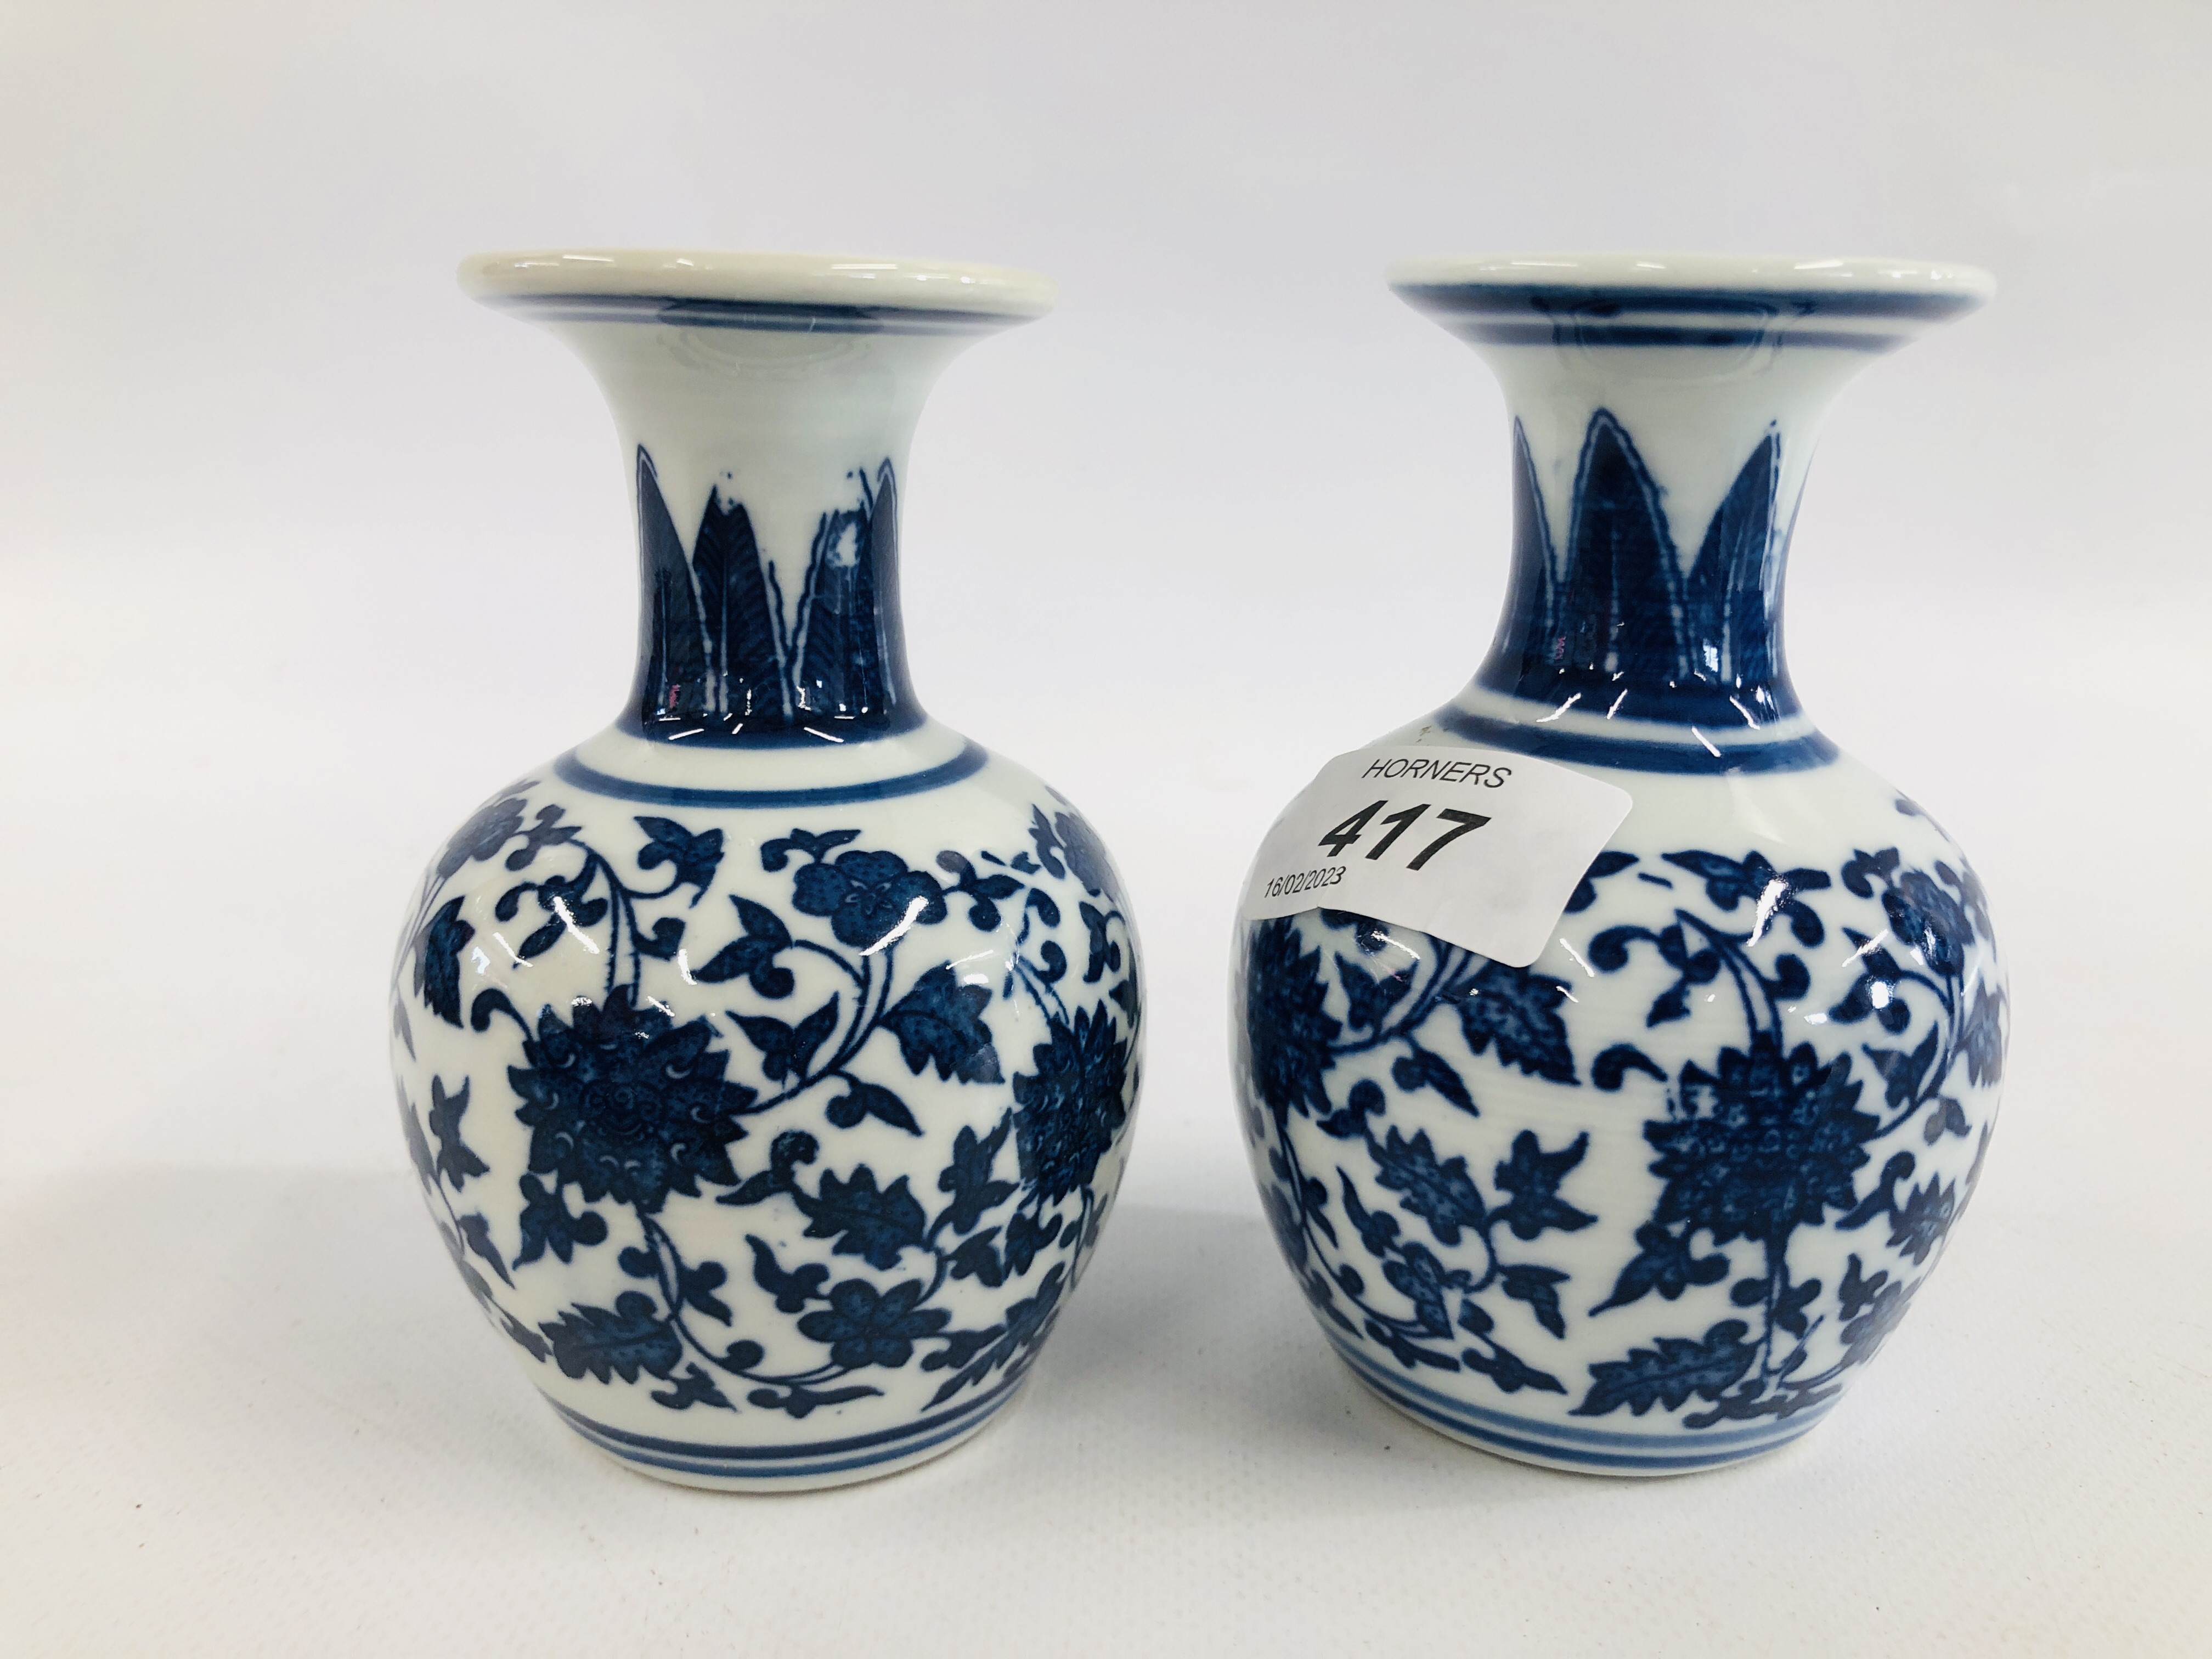 A PAIR OF CHINESE BLUE AND WHITE VASES OF BALUSTER FORM WITH FLARED RIMS BEARING "KANXI" SEAL MARK, - Image 4 of 5